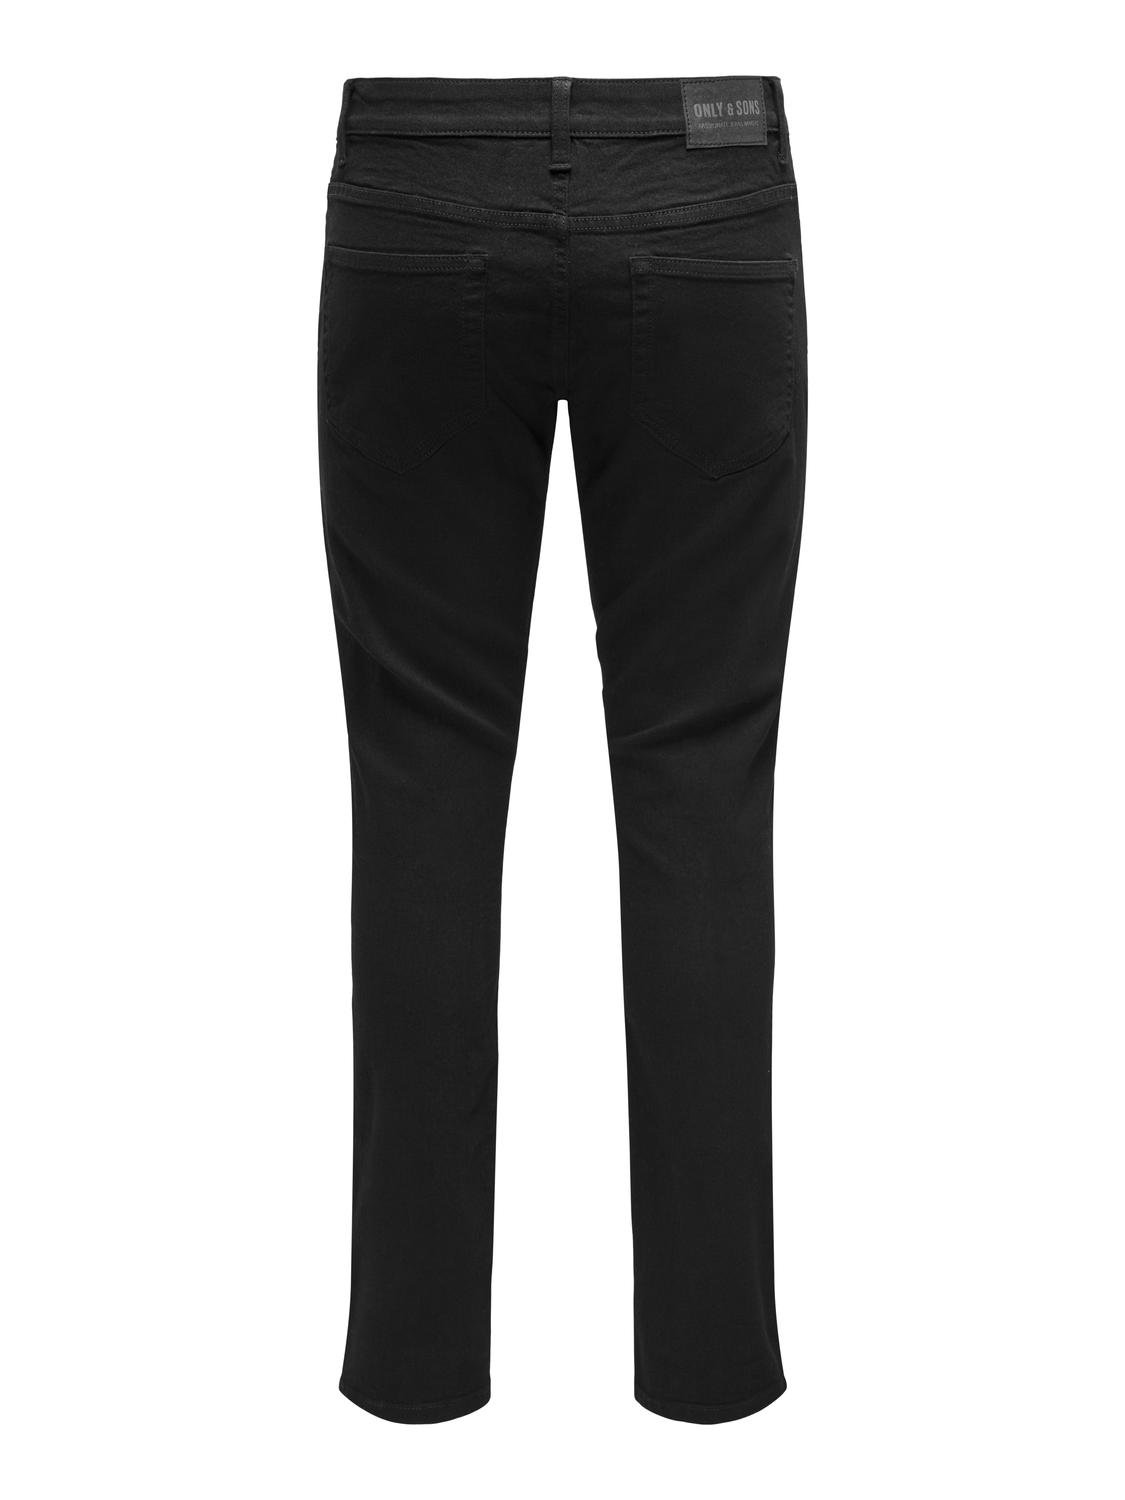 ONLY & SONS Jeans Slim Fit Taille moyenne -Black Denim - 22027899